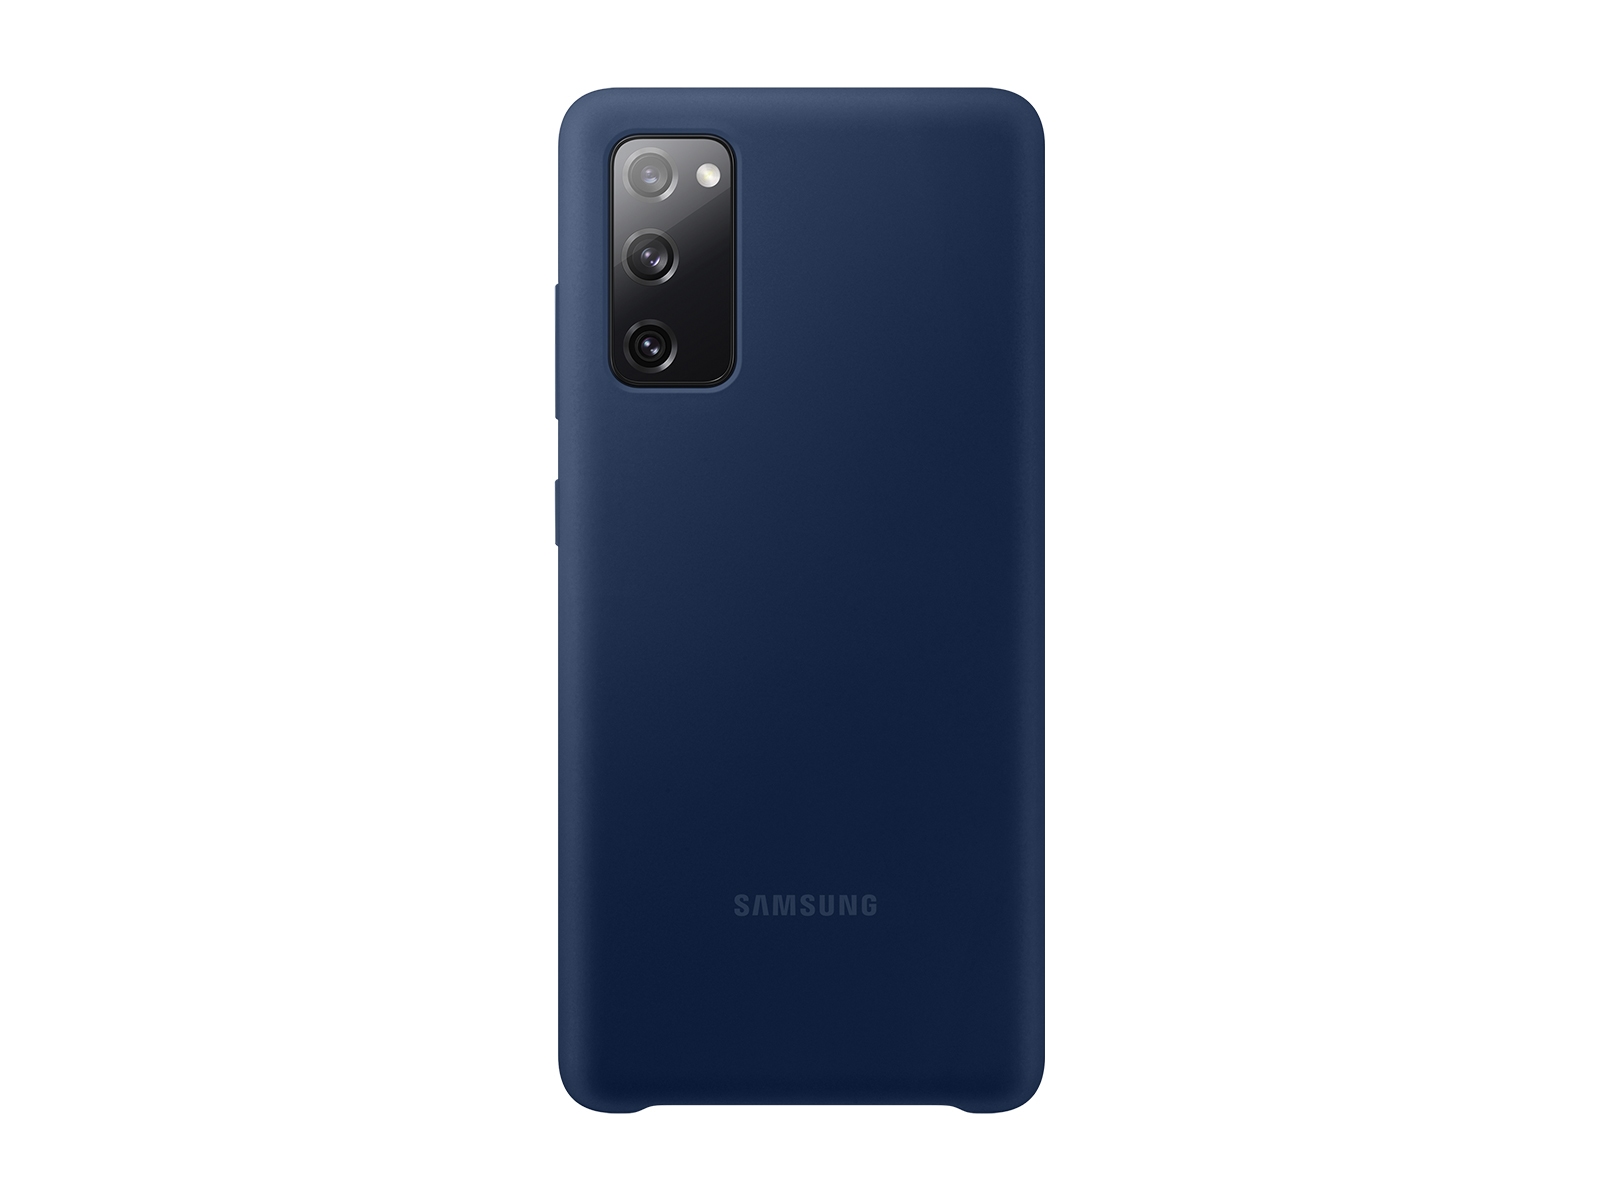 Thumbnail image of Galaxy S20 FE 5G Silicone Cover, Navy